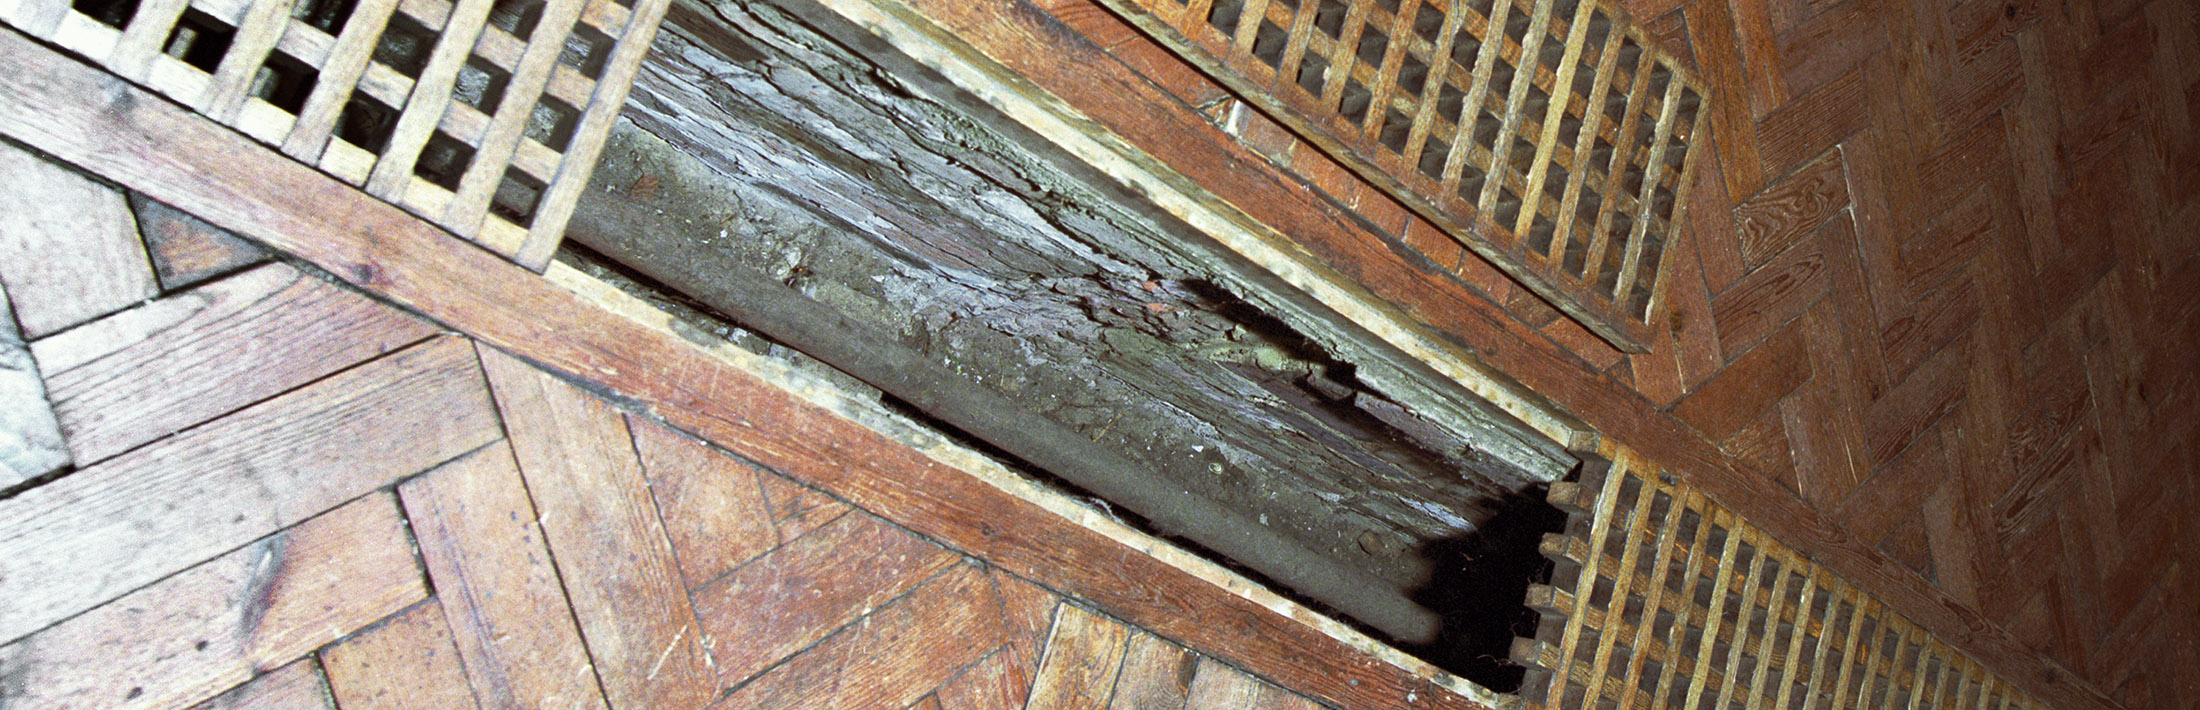 Heating duct in the floor at Watts Gallery, Surrey